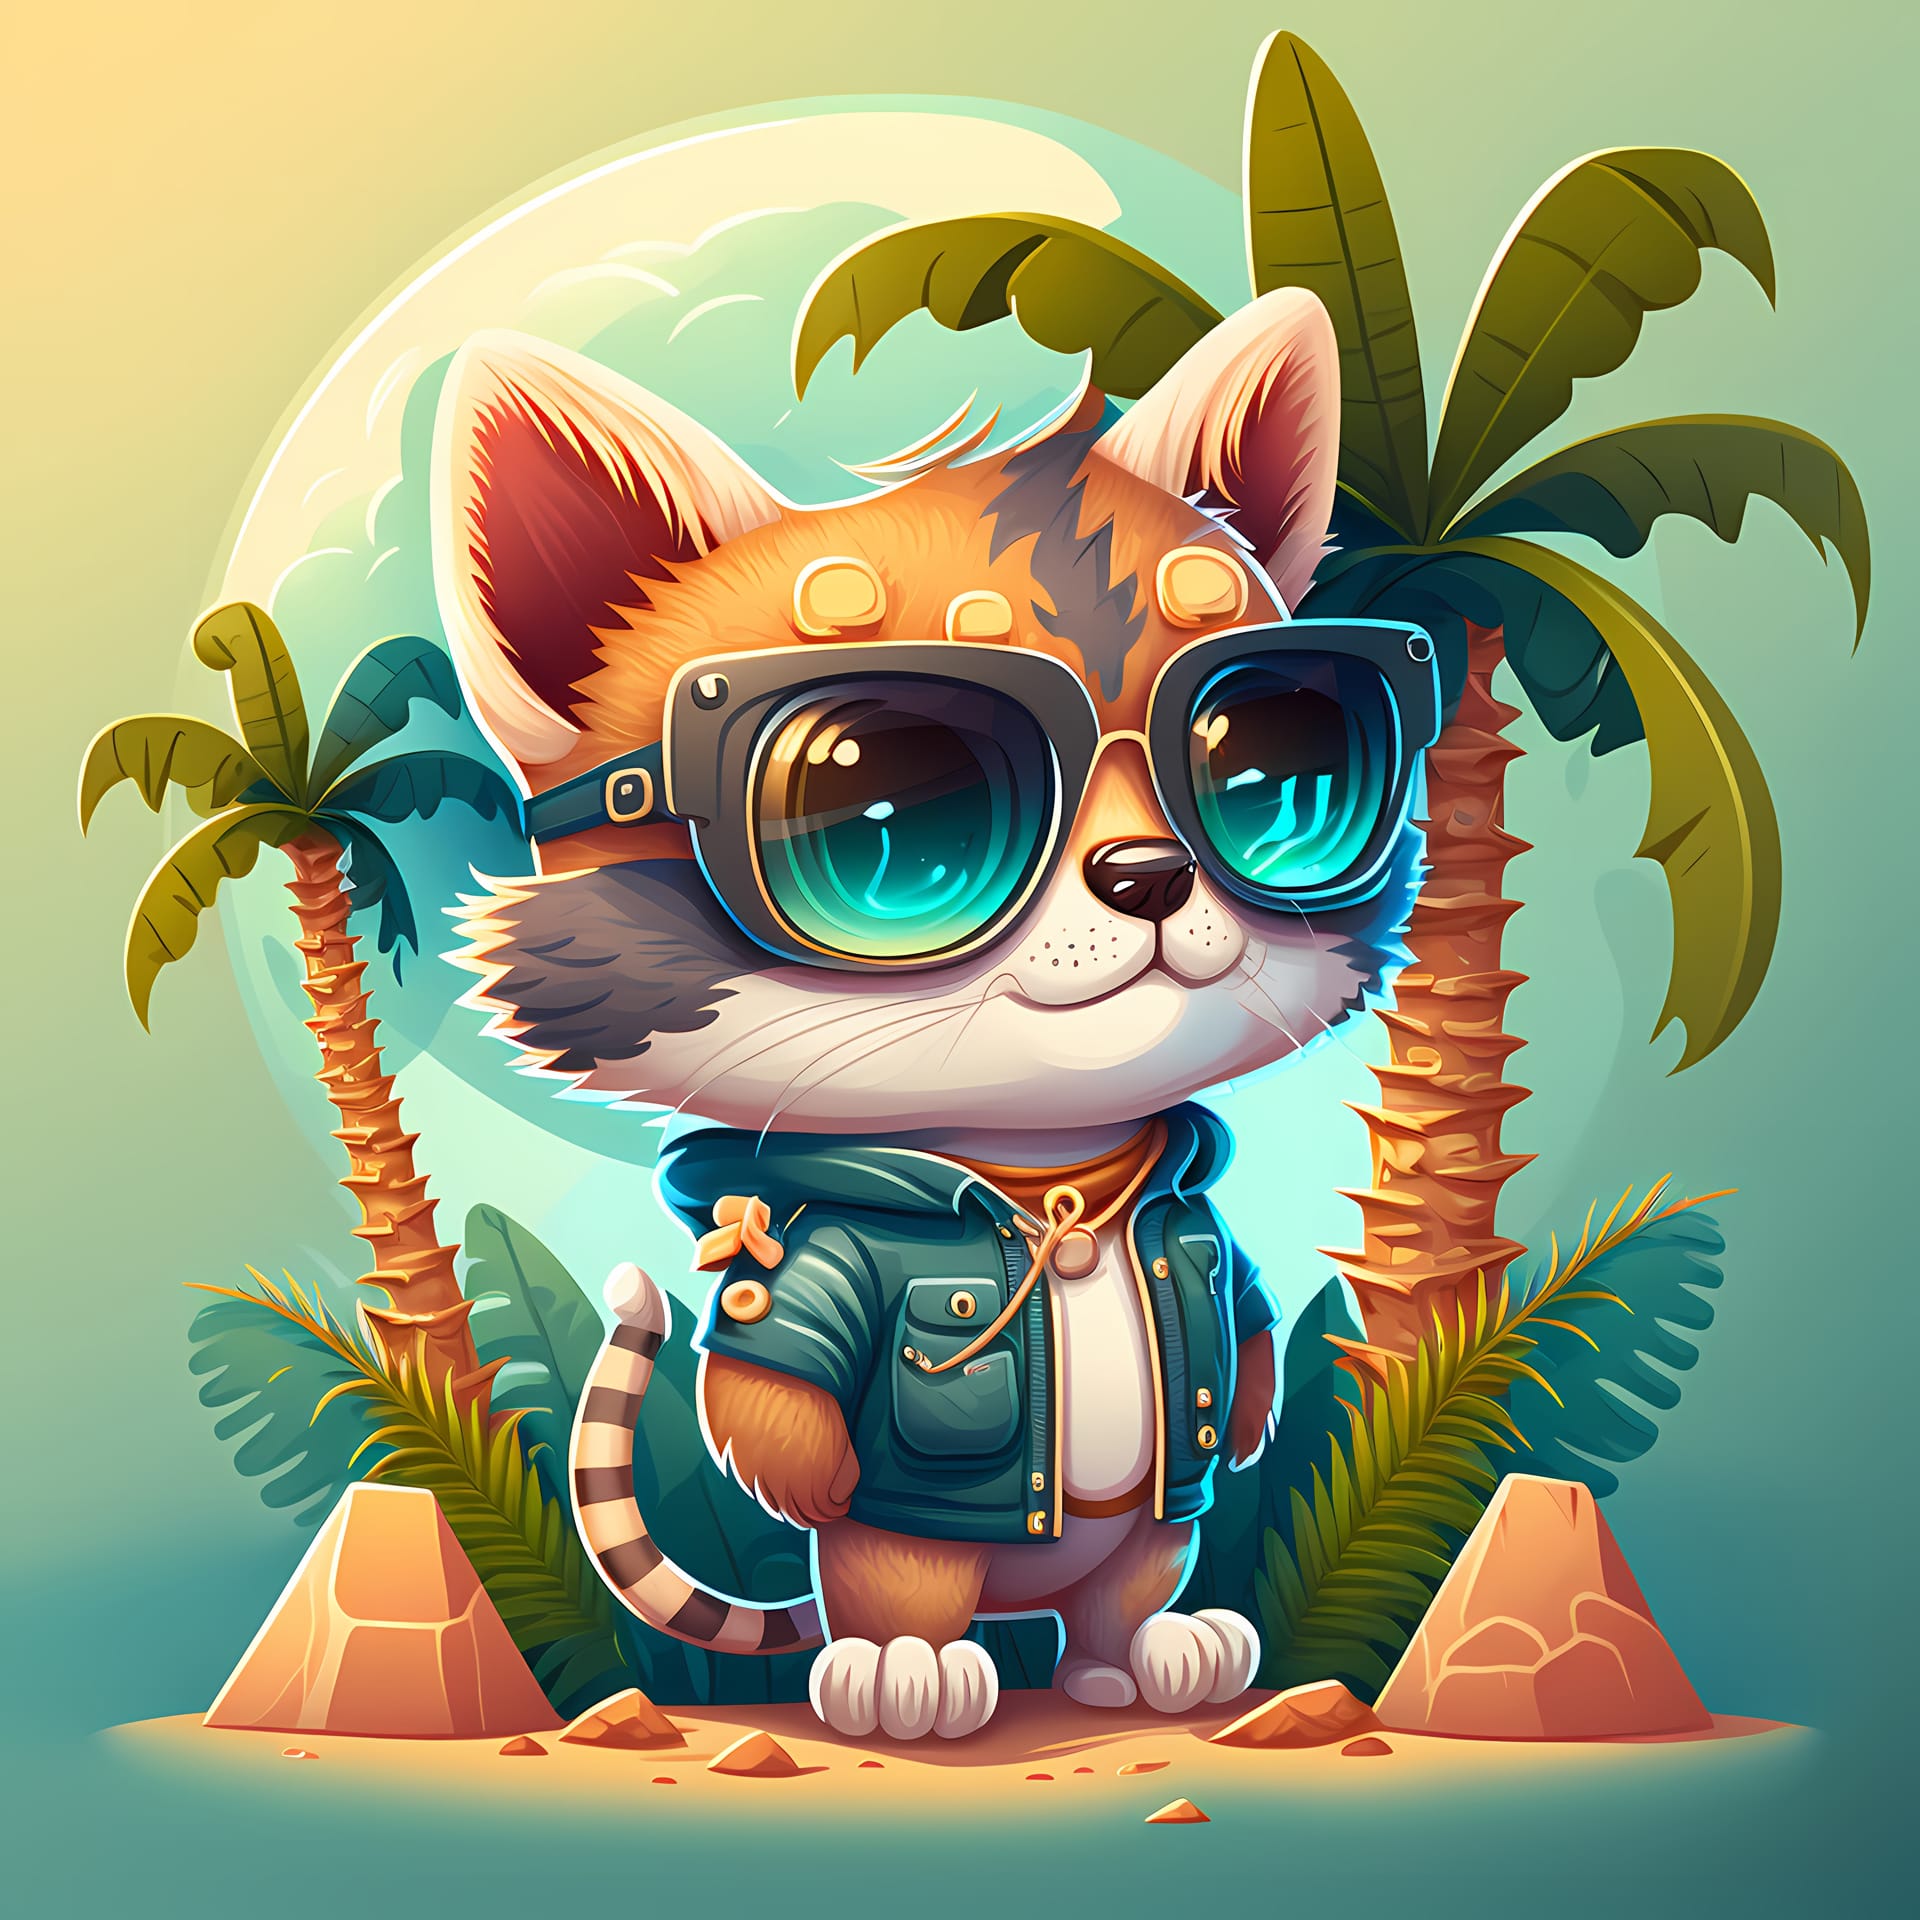 Summer background cat wearing sunglasses with beach palm trees image